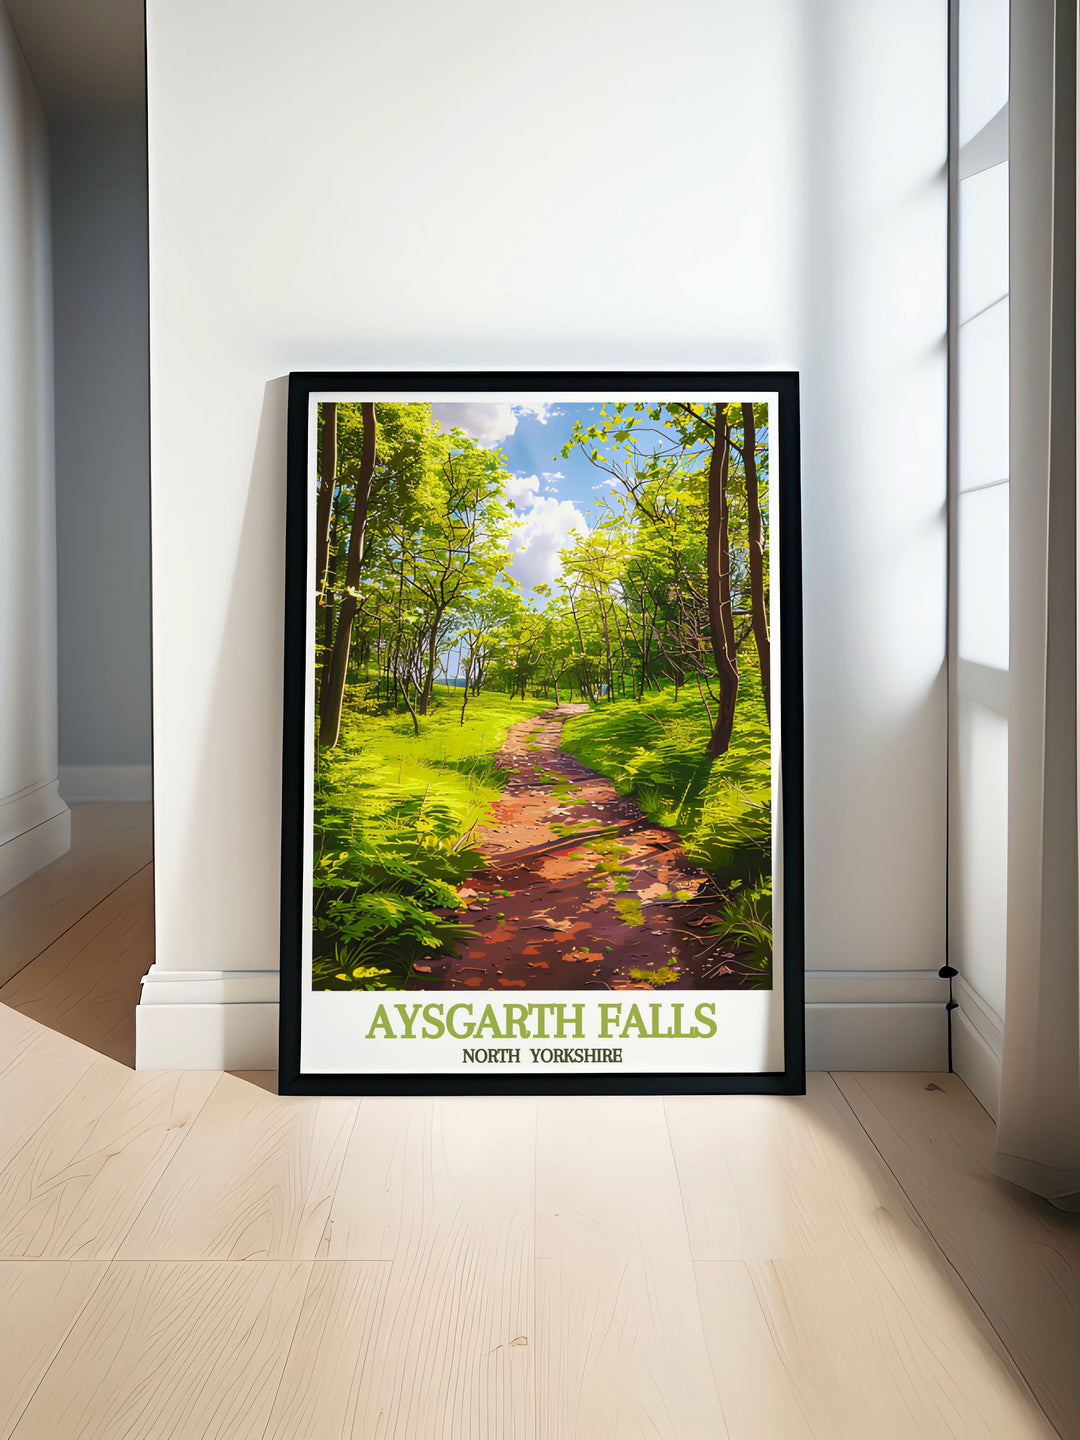 Vintage travel print featuring woodland trails in the Yorkshire Dales capturing the serene beauty of North Yorkshire perfect for home decor or as a gift for nature lovers and travel enthusiasts.